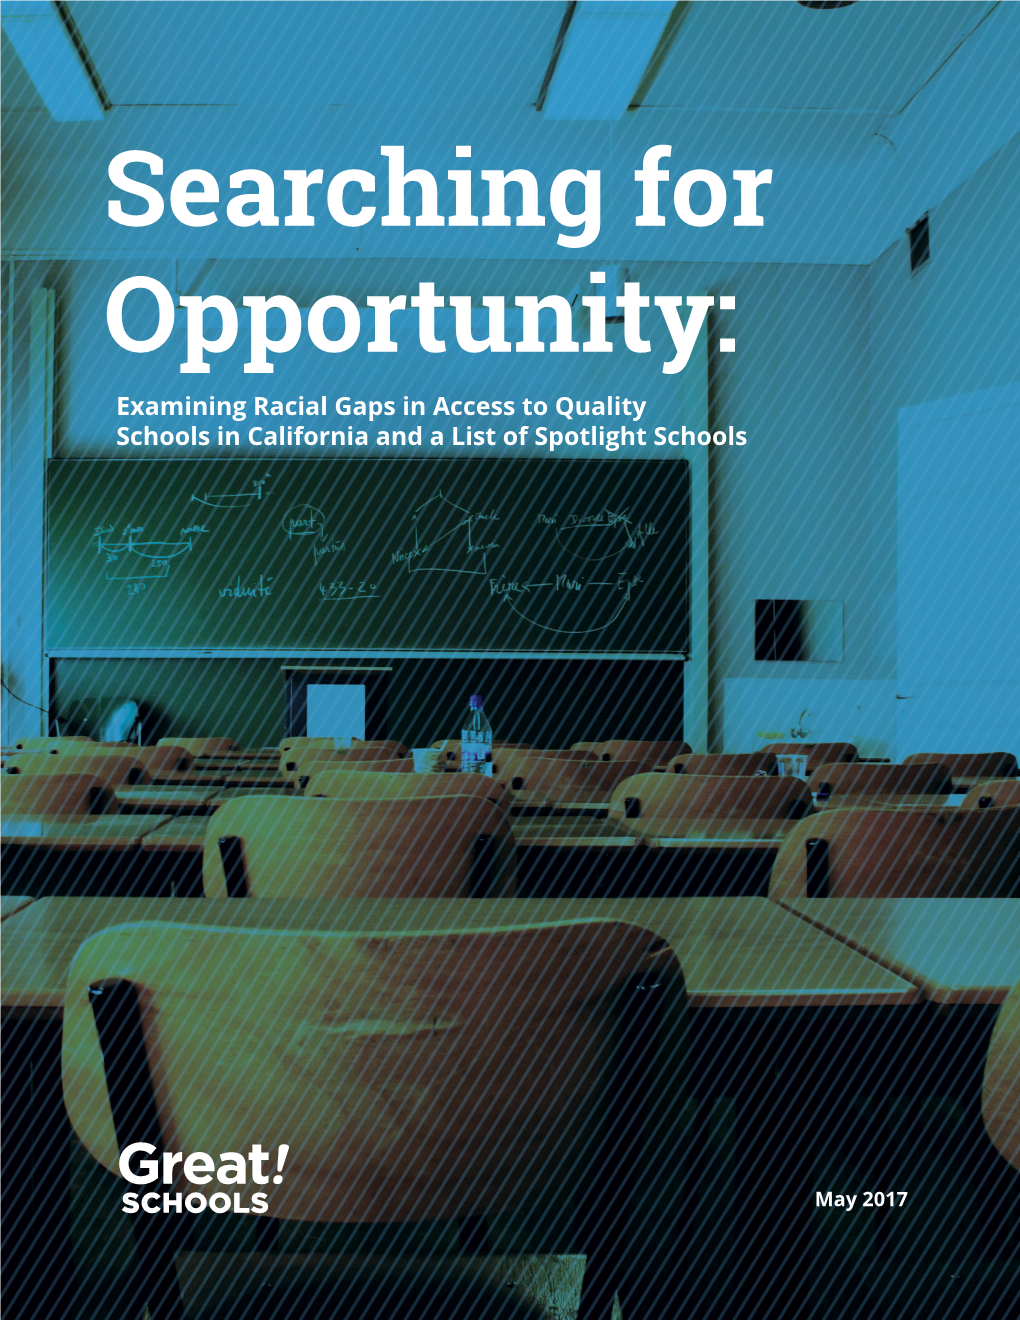 Searching for Opportunity: Examining Racial Gaps in Access to Quality Schools in California and a List of Spotlight Schools